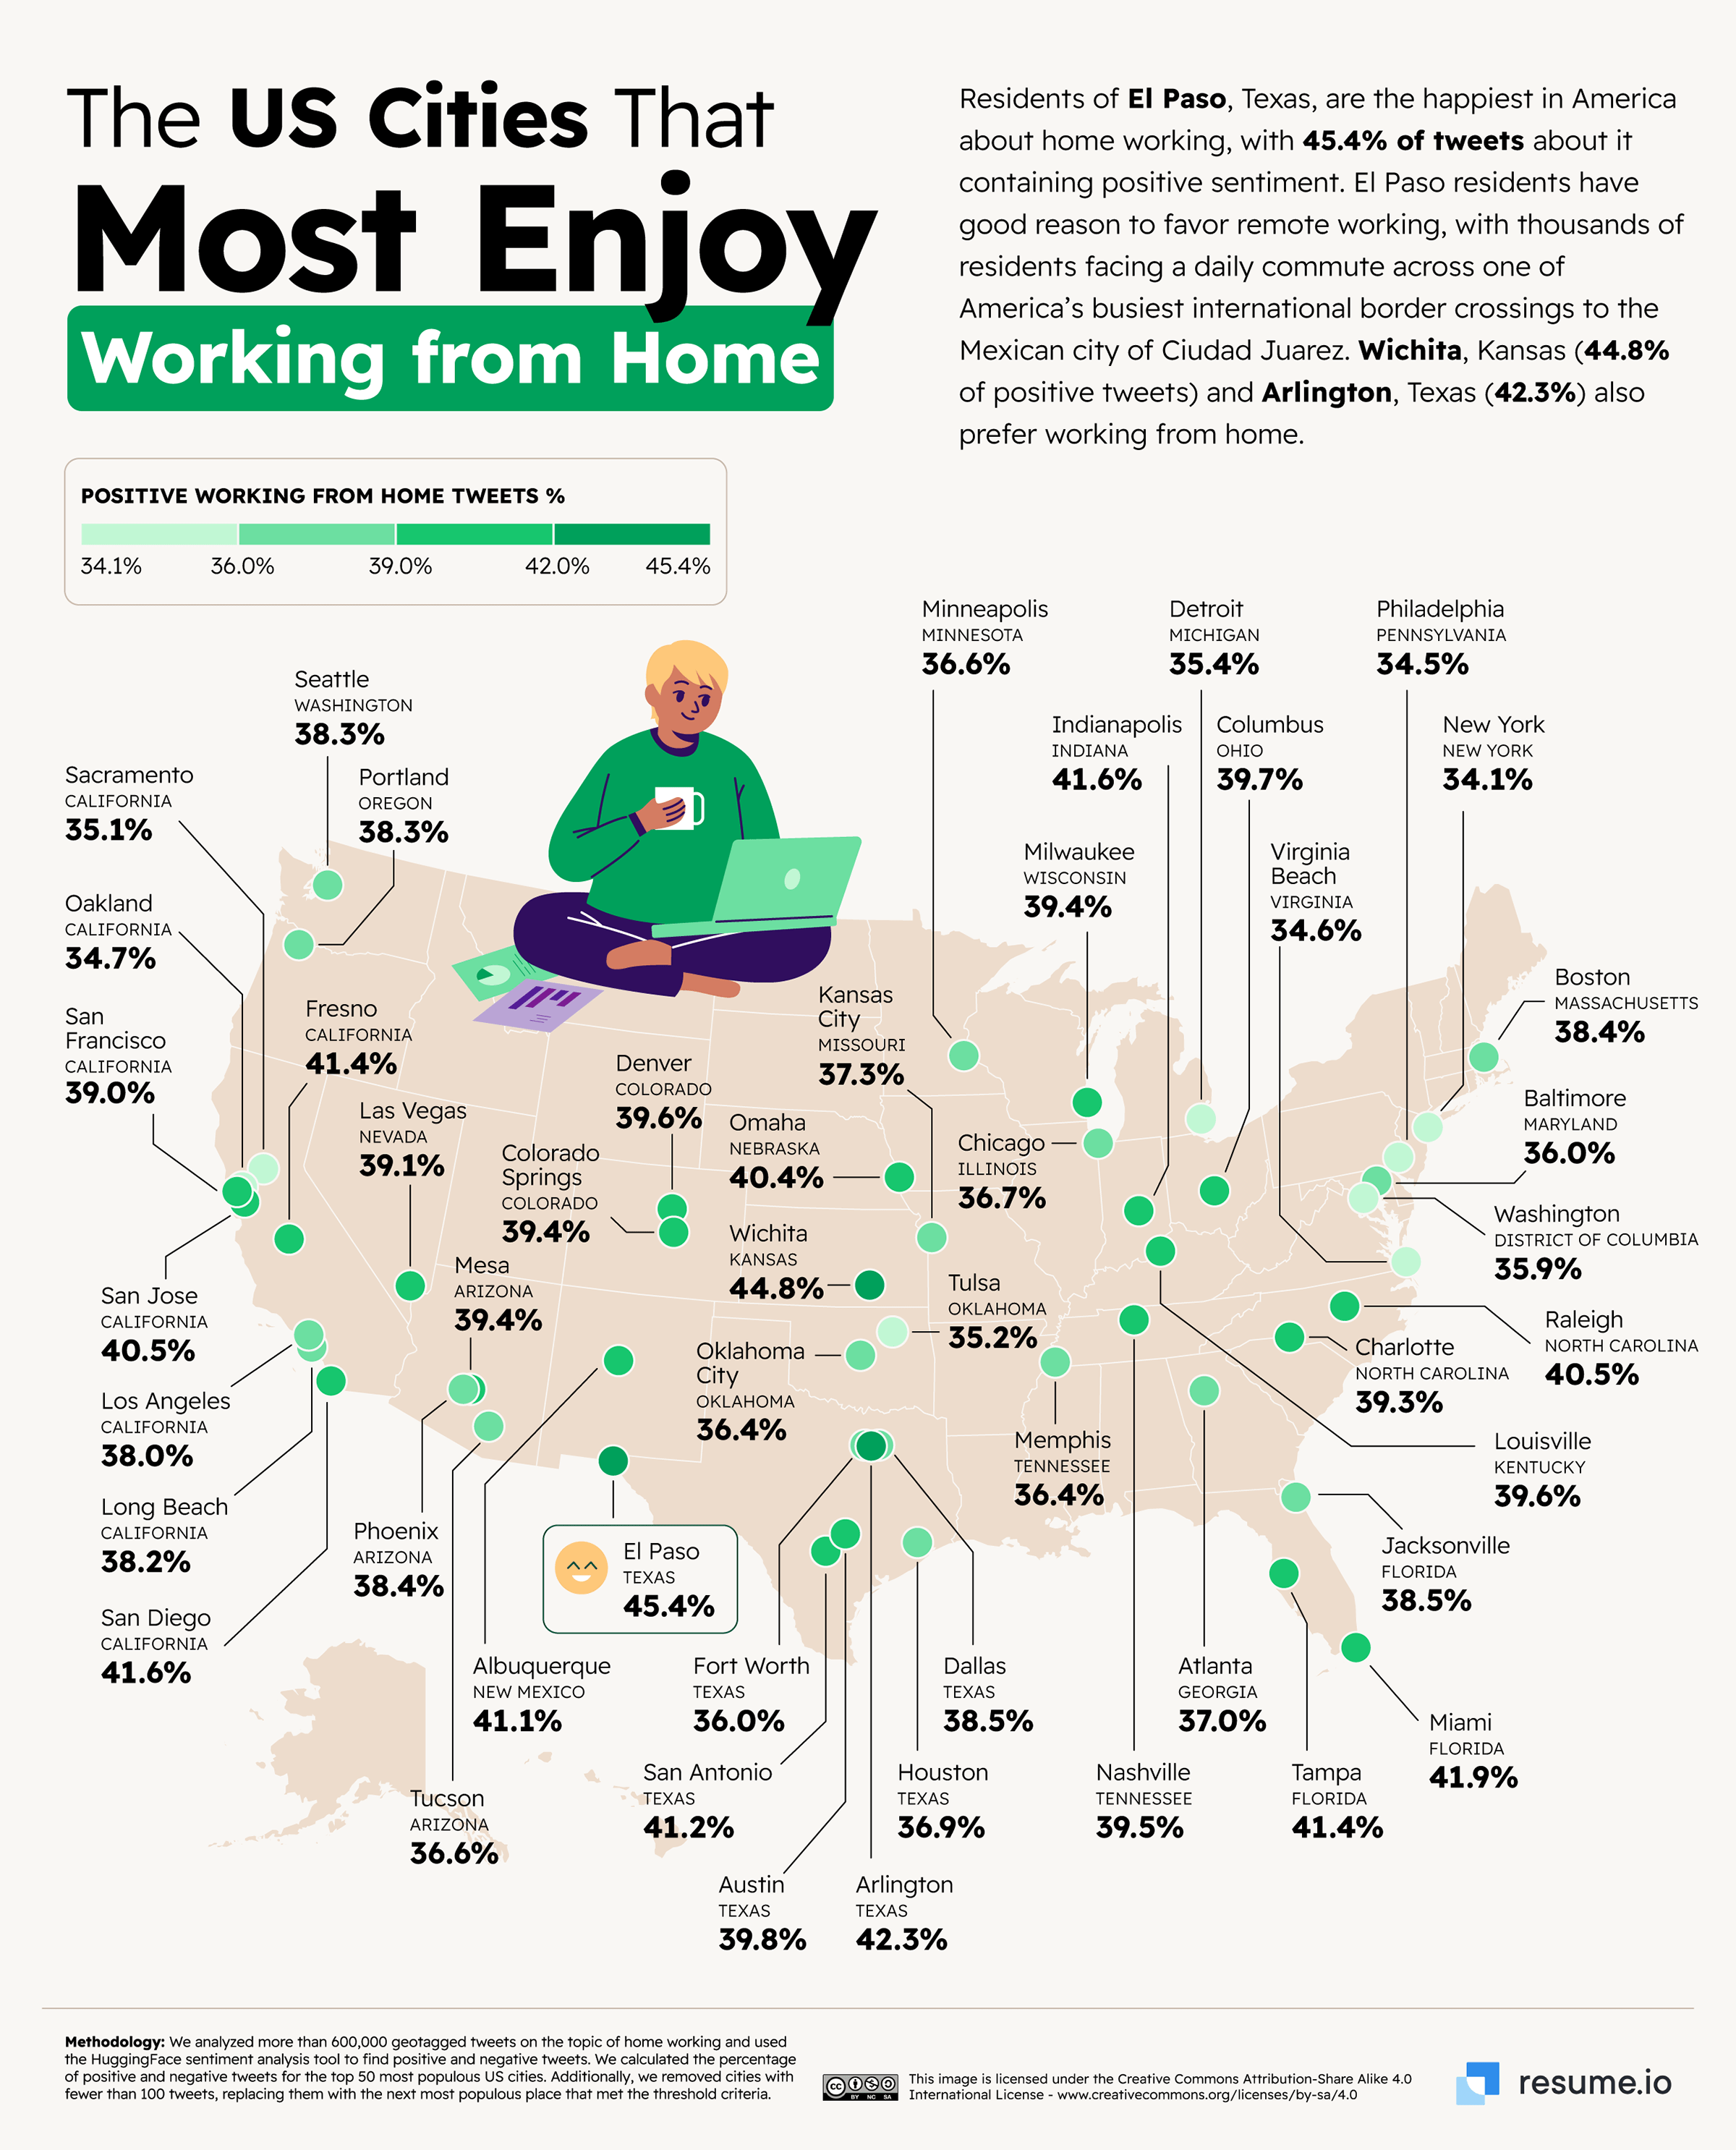 The US Cities that most enjoy working from home.